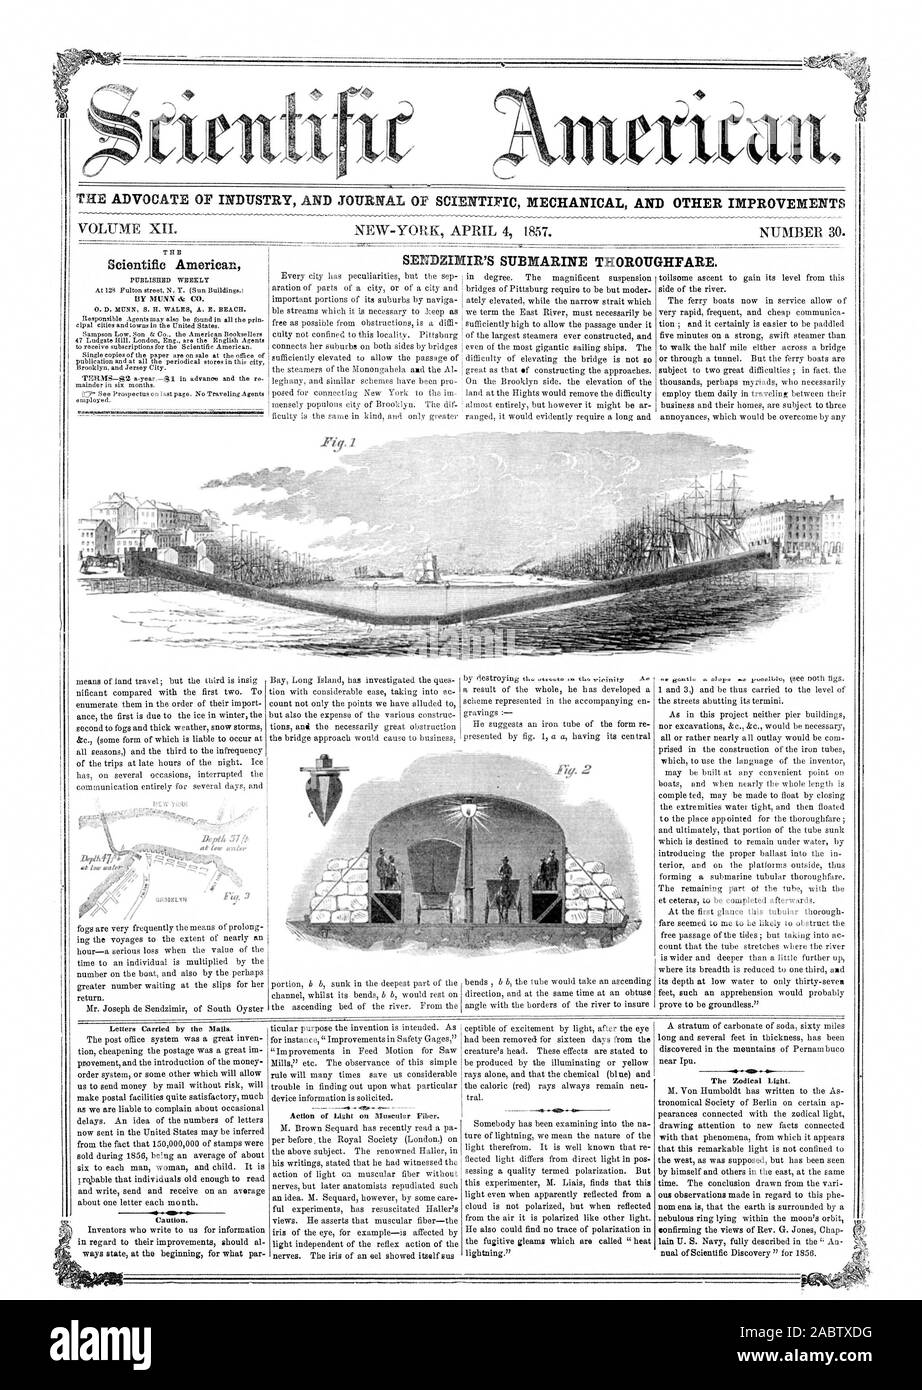 THE ADVOCATE OF INDUSTRY AND JOURNAL OF SCIENTIFIC MECHANICAL AND OTHER IMPROVEMENTS VOLUME XII. SENDZIMIR'S SUBMARINE THOROUGHFARE. Scientific American 414, 1857-04-04 Stock Photo